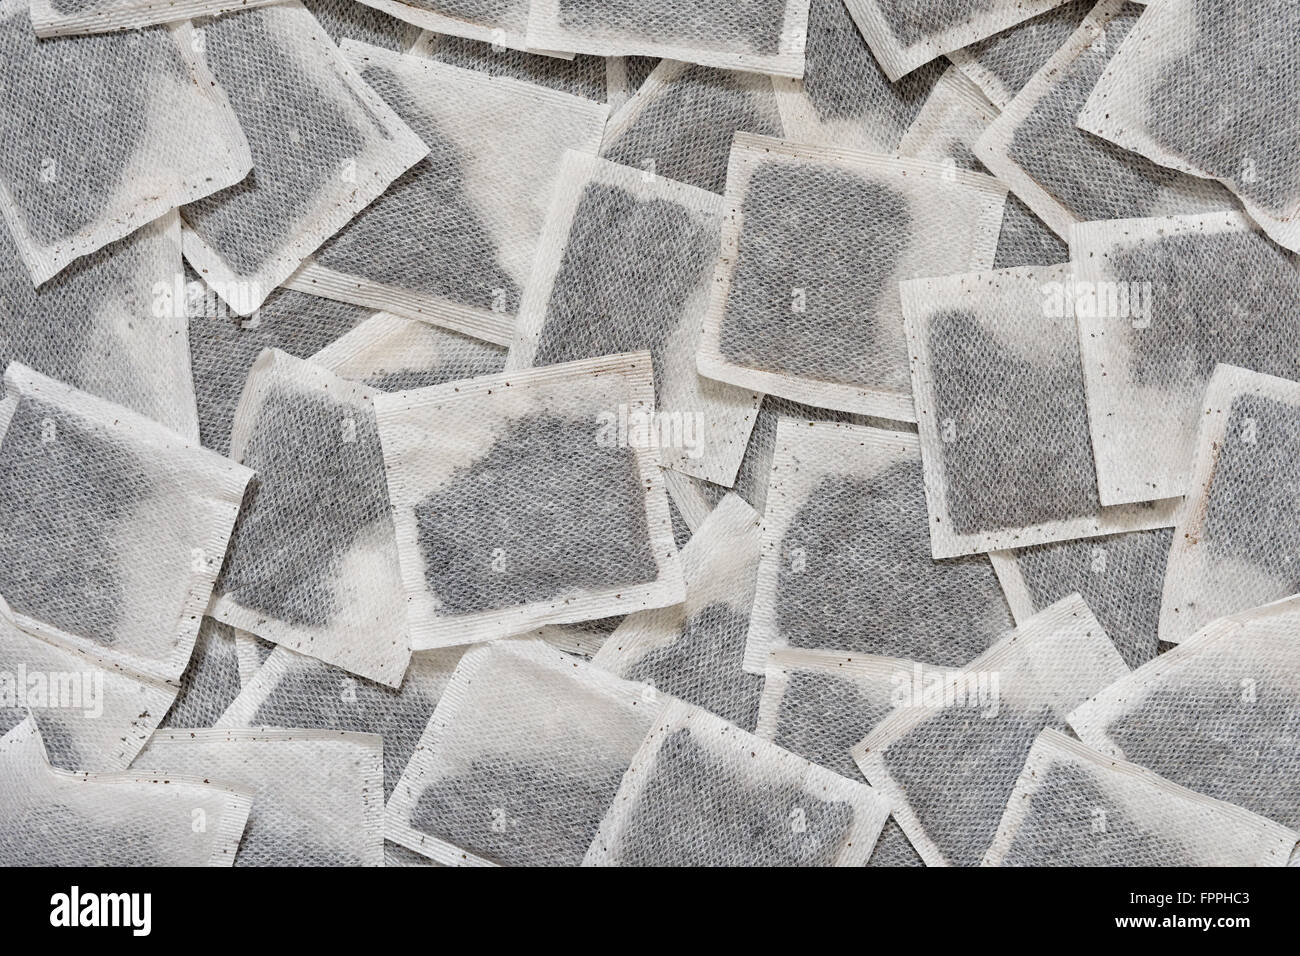 Full frame image of a pile of Earl Grey tea bags Stock Photo